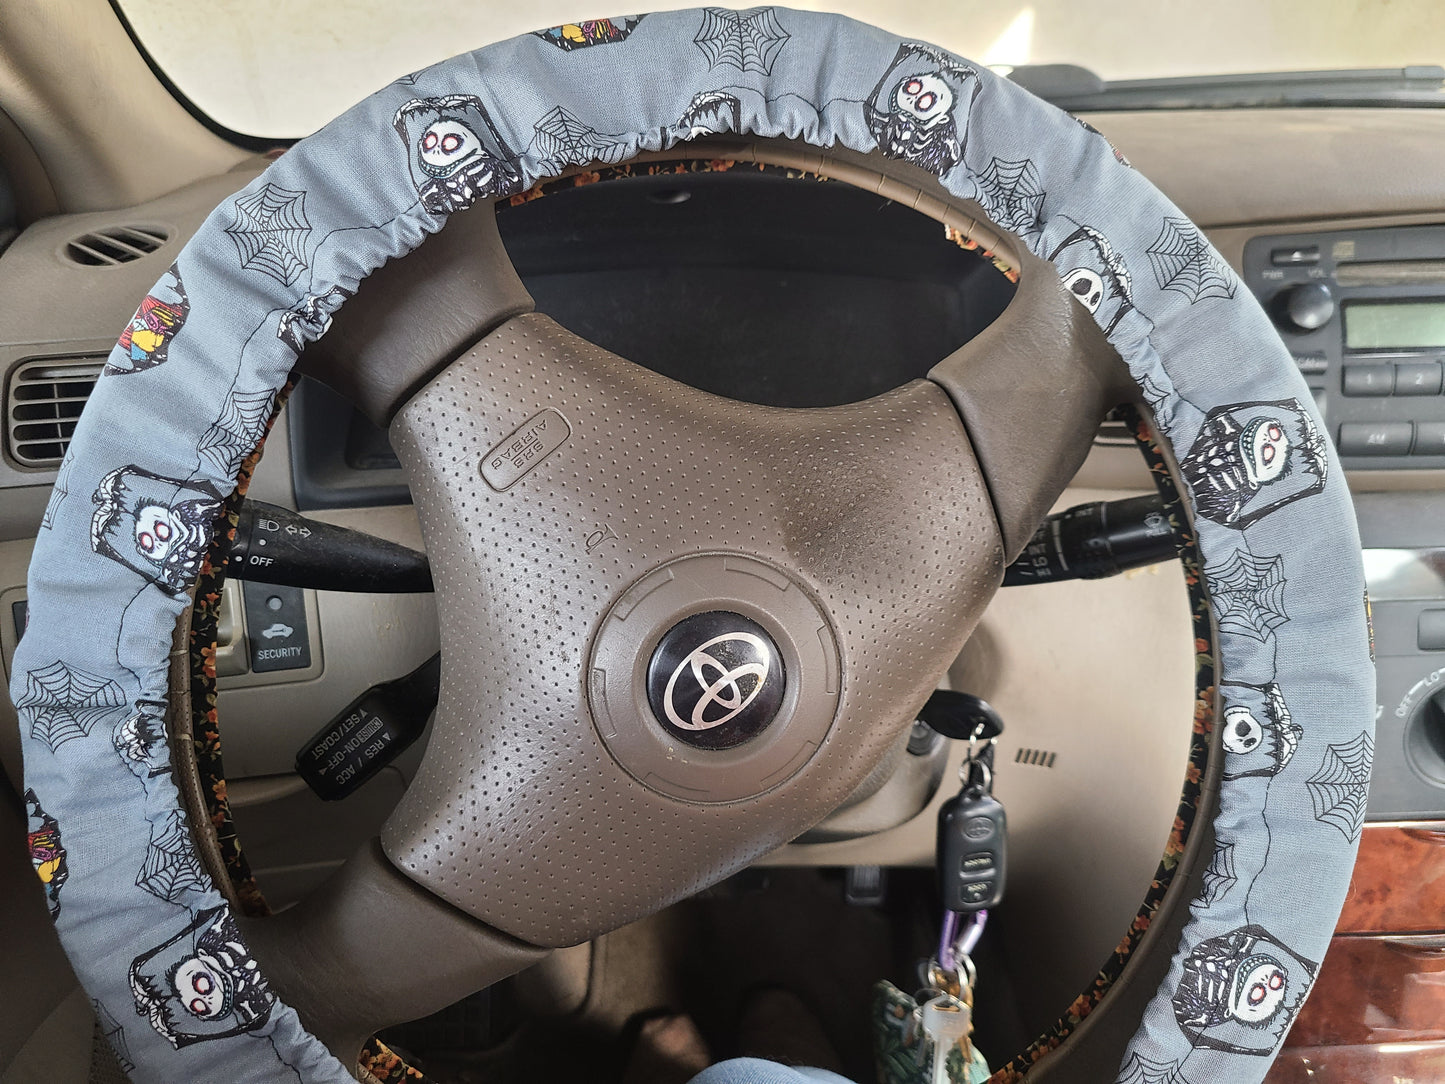 Jack NBC Steering Wheel Cover made with Licensed Disney Fabric